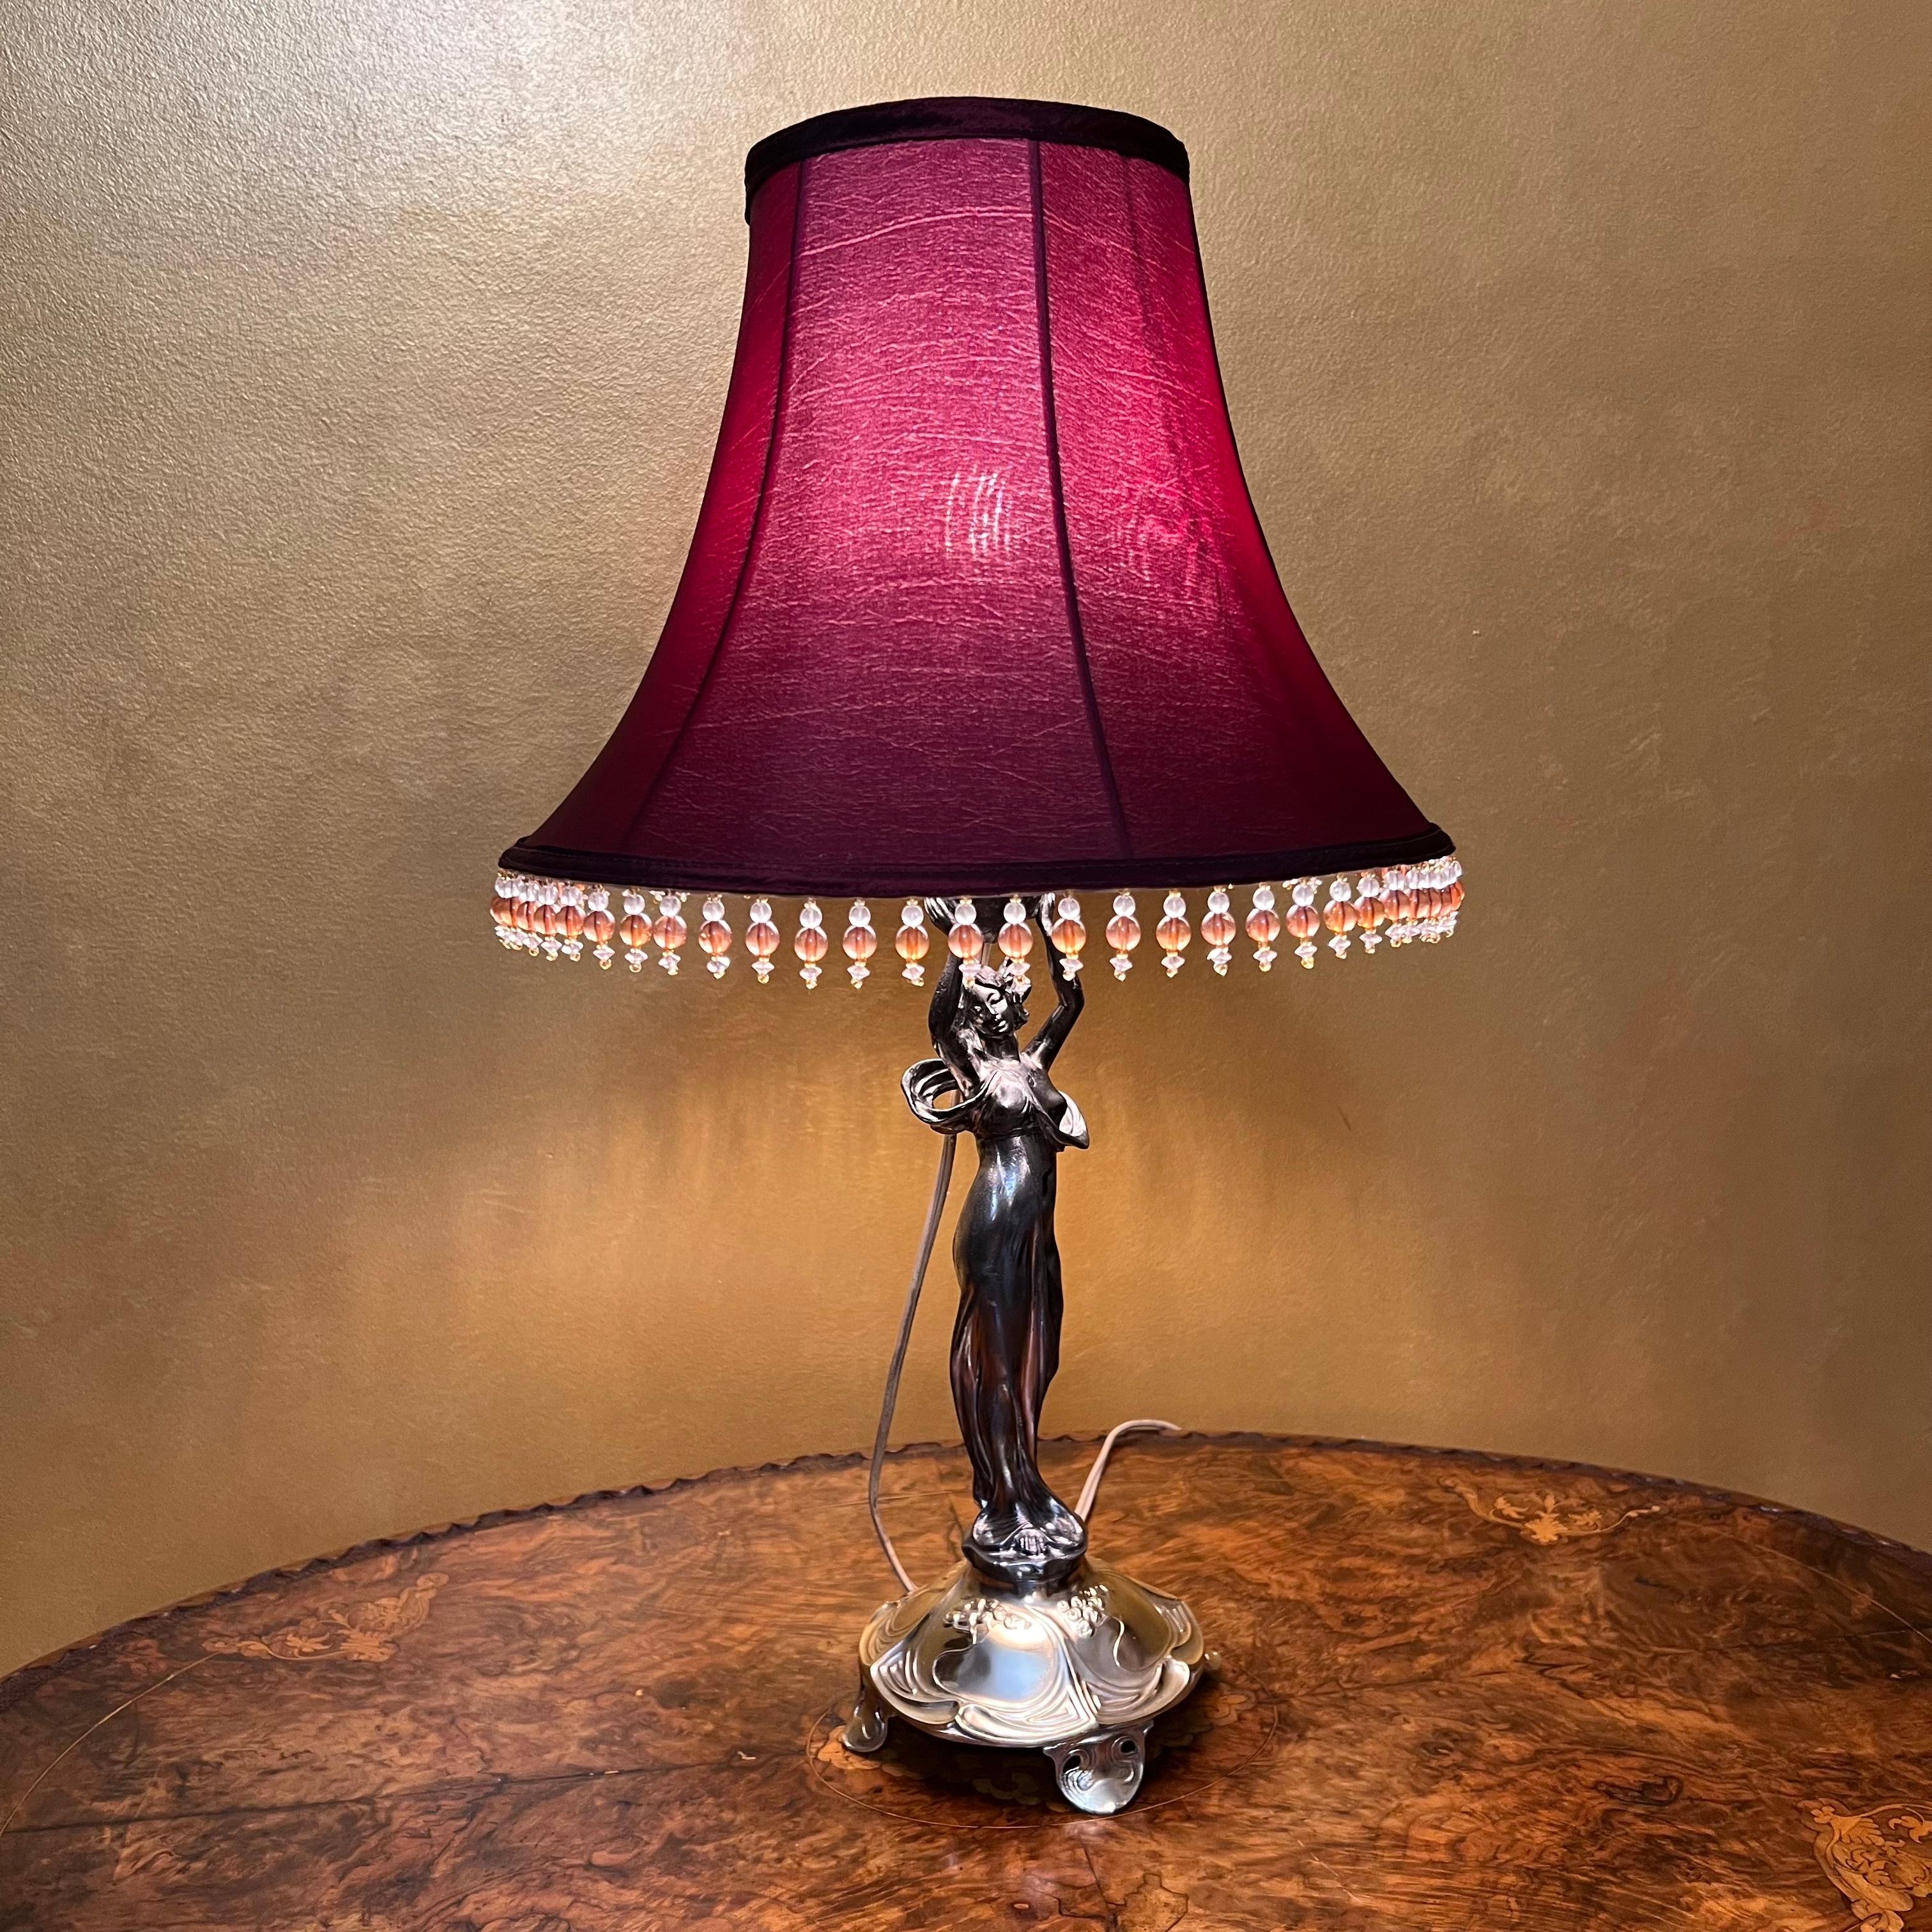 Lady shape lamp body silver body, brass base, burgundy lamp shape.

Material: Brass

Measurements: 59cm high, 17cm diameter 

Pick Up Location at: 64 Kalang Road, Edensor Park NSW

Postage via Australia Post with tracking available